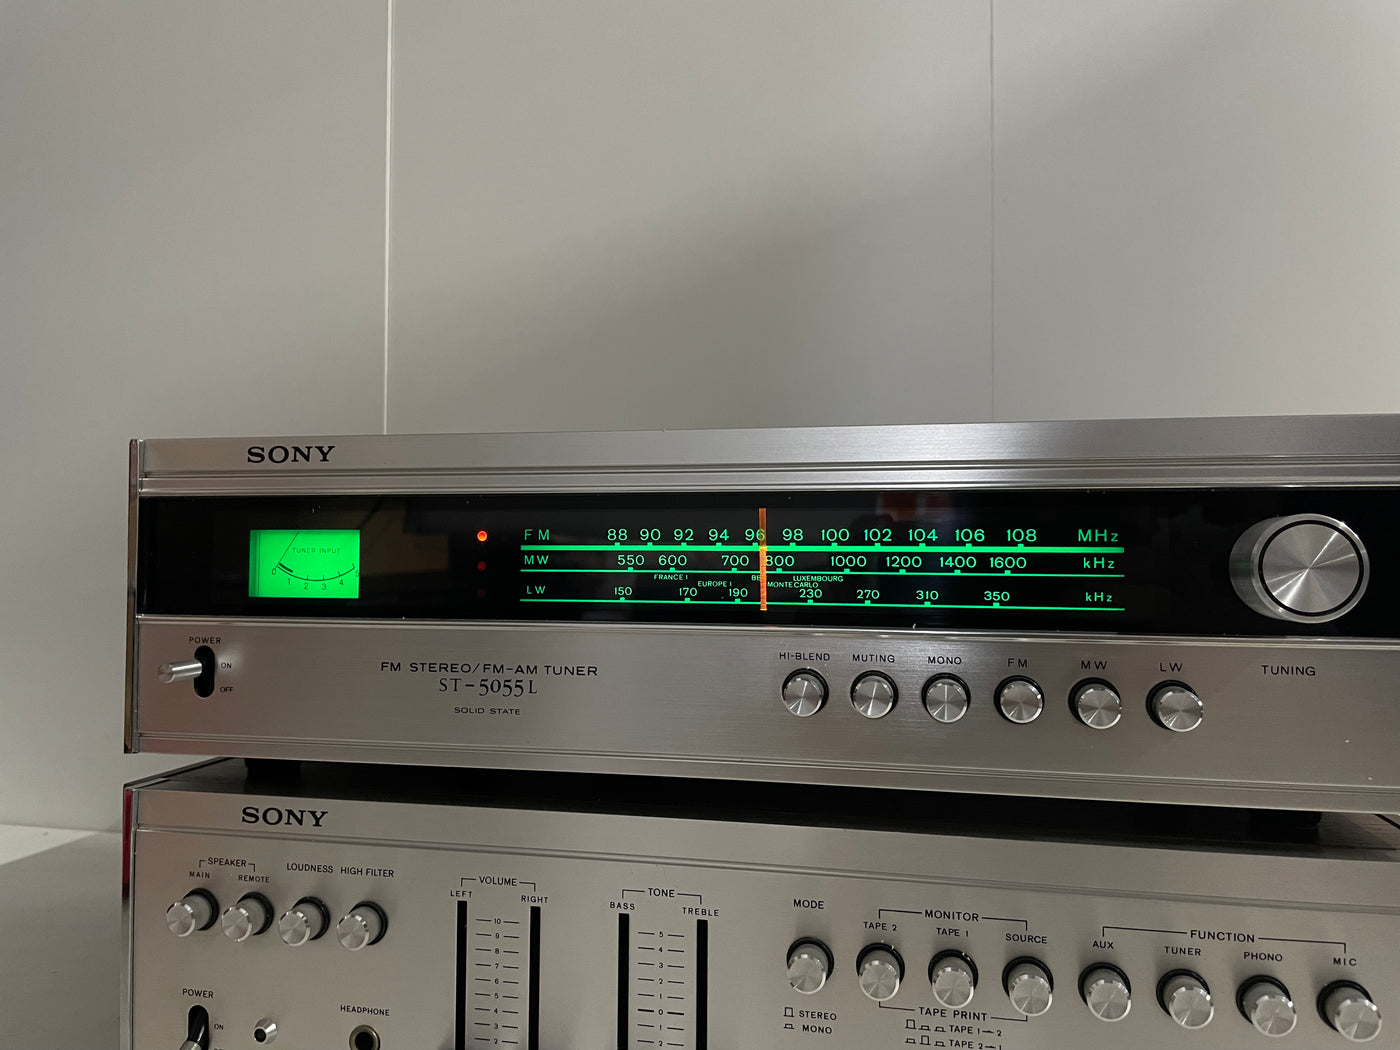 Sony TA-1055 Integrated Stereo Amplifier + ST-5055L Stereo FM-AM Tuner